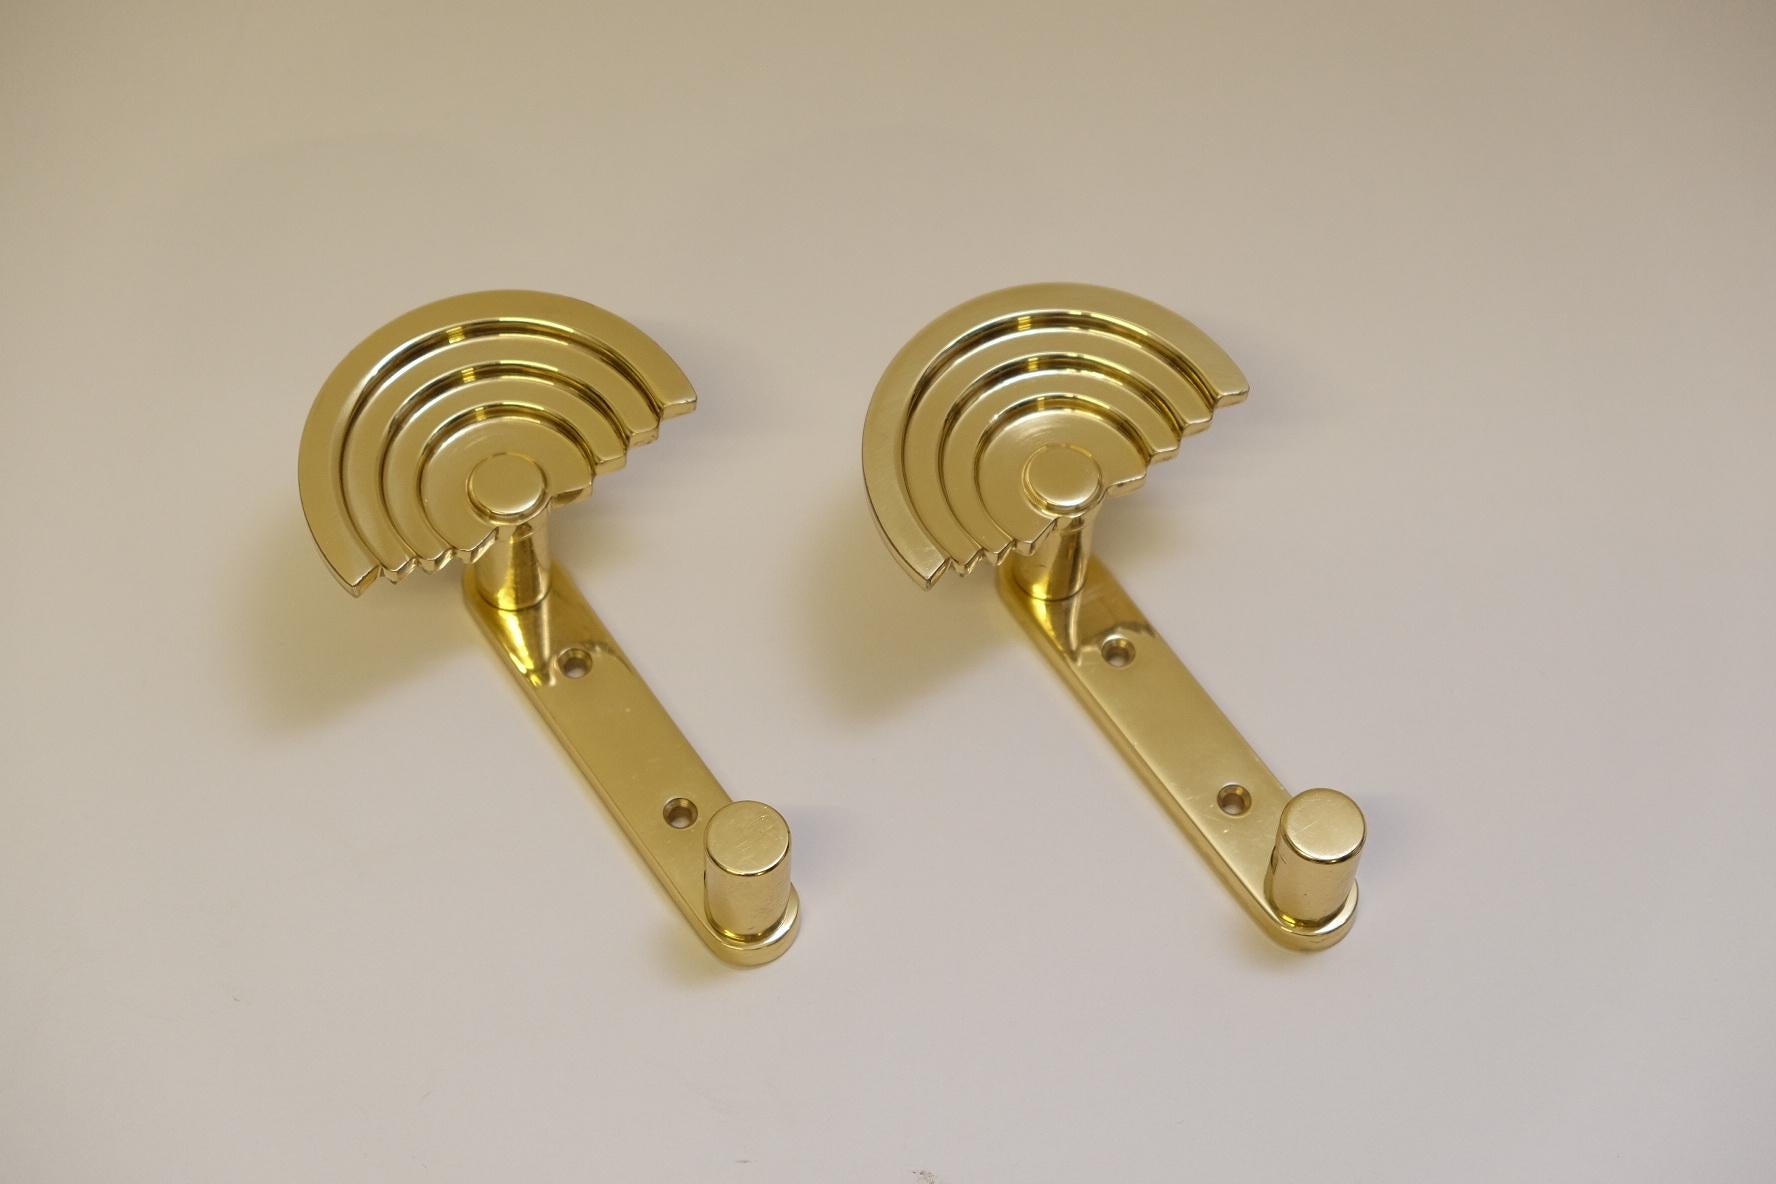 A pair of coat hooks designed by Ettore Sottsass in 1985 for Valli & Valli.
Crafted from solid brass, the coat hooks are shaped like an umbrella or rainbow.
Good original condition with signs of wear where the coat hooks are hung.
Easy to attach